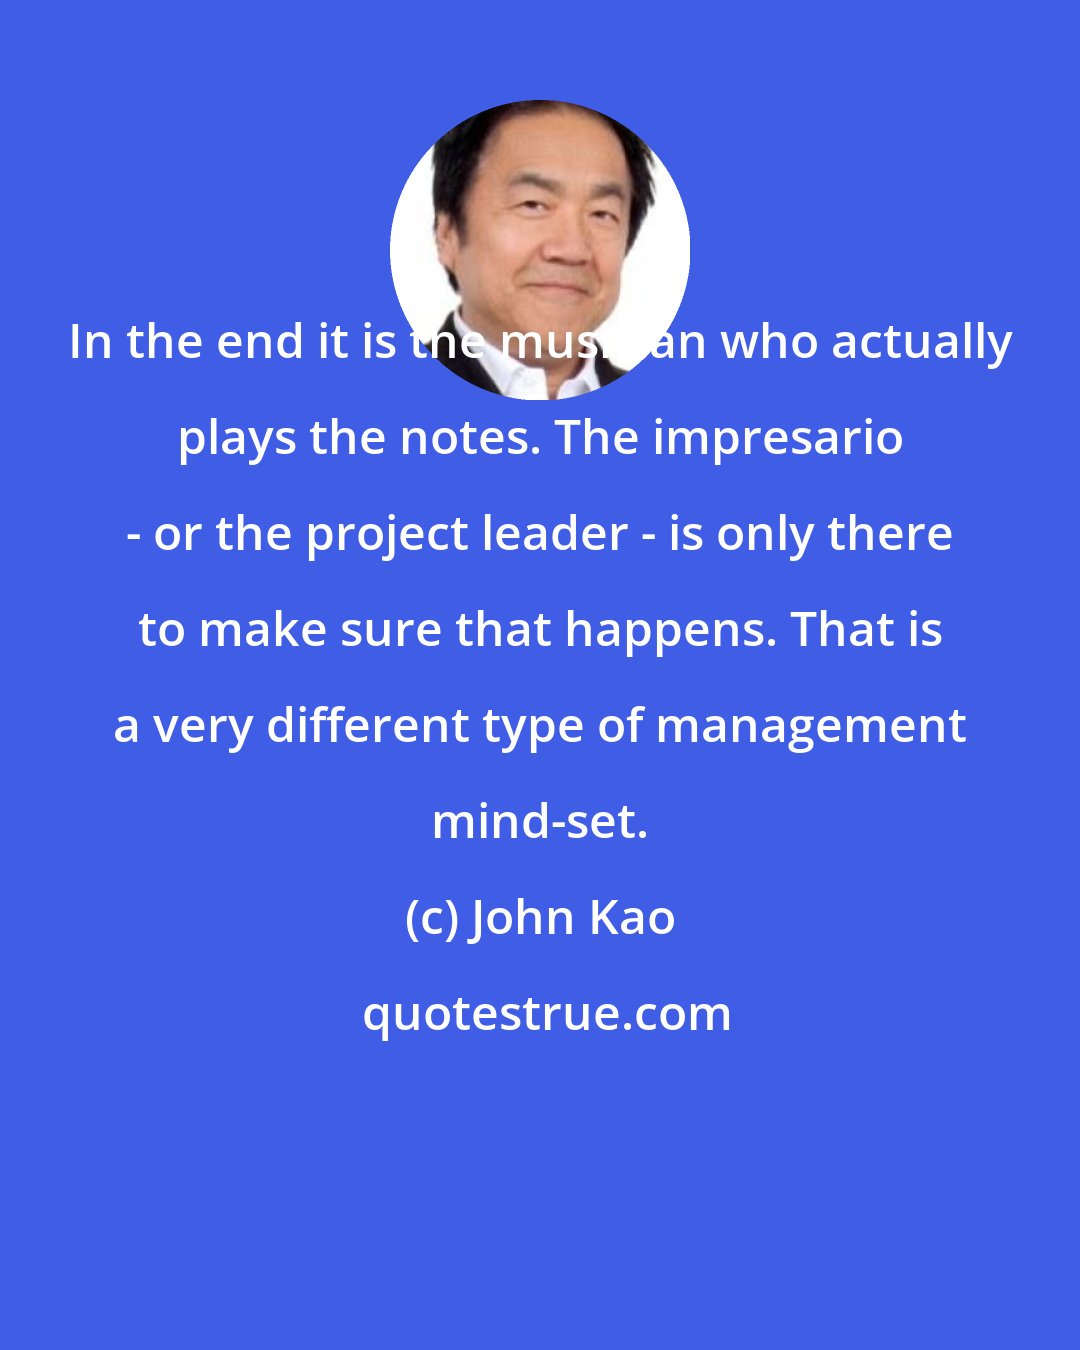 John Kao: In the end it is the musician who actually plays the notes. The impresario - or the project leader - is only there to make sure that happens. That is a very different type of management mind-set.